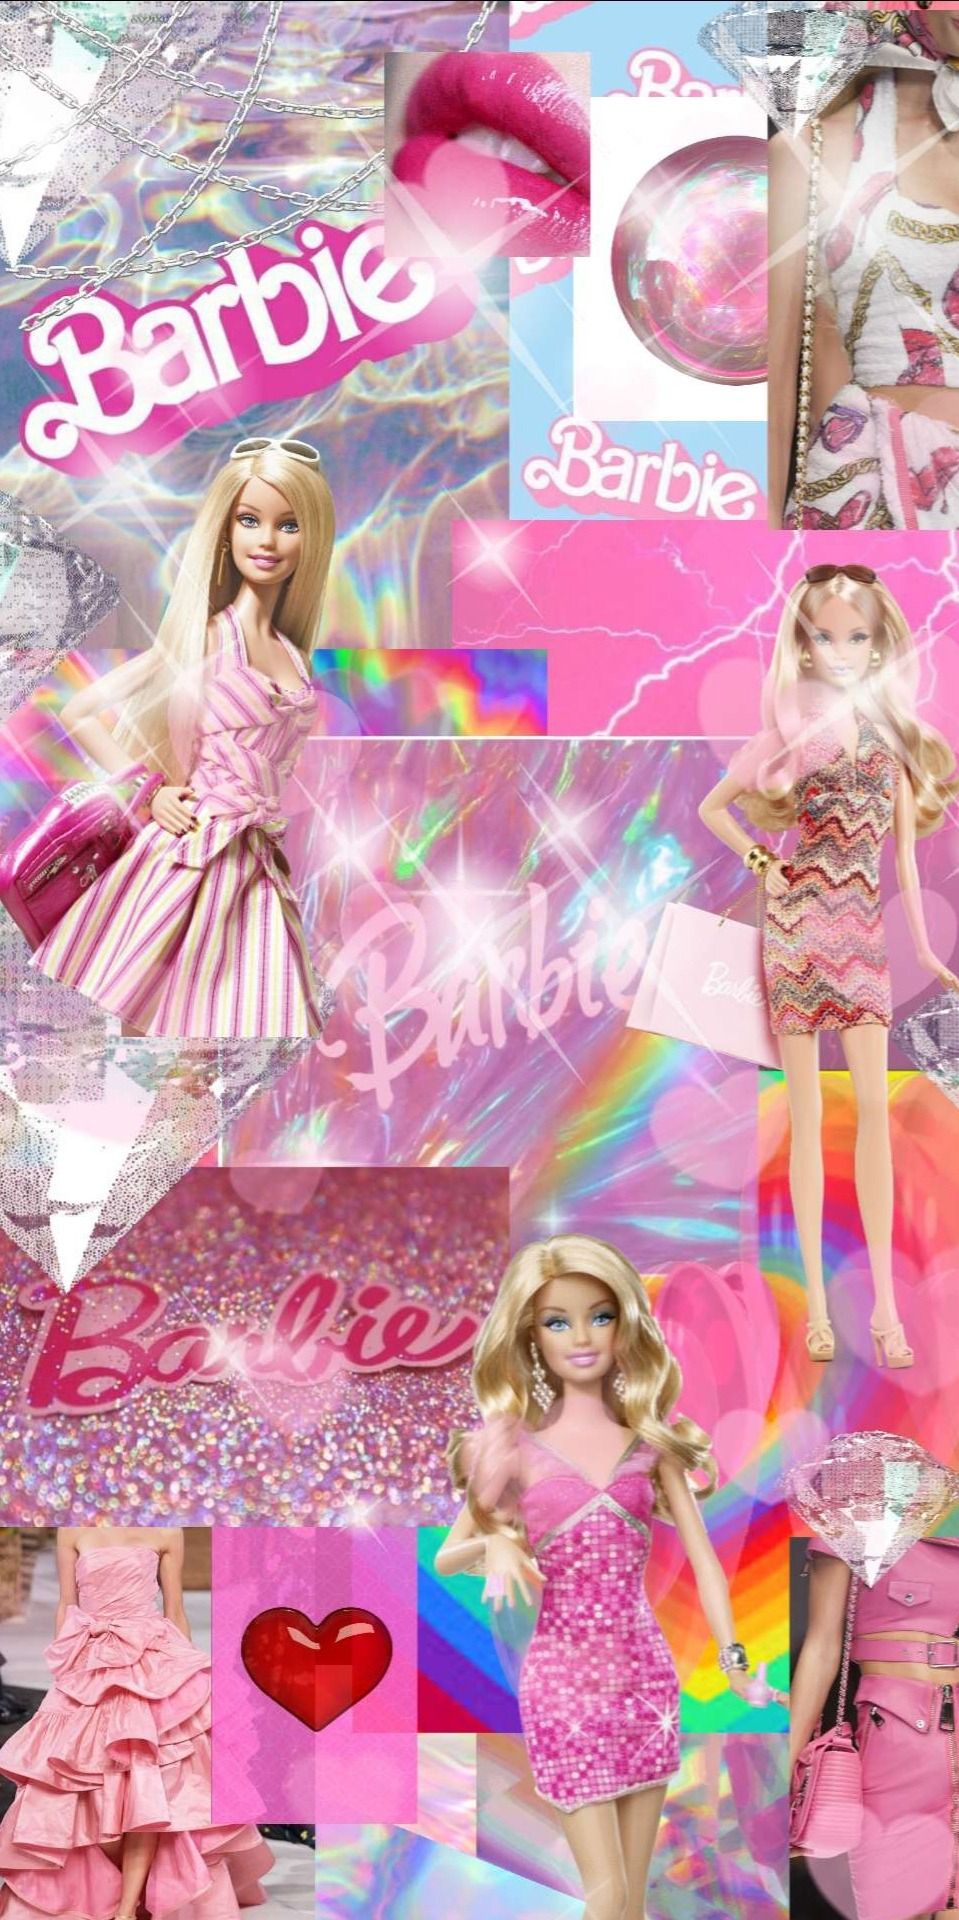 A collage of images of Barbie dolls in pink dresses - Barbie